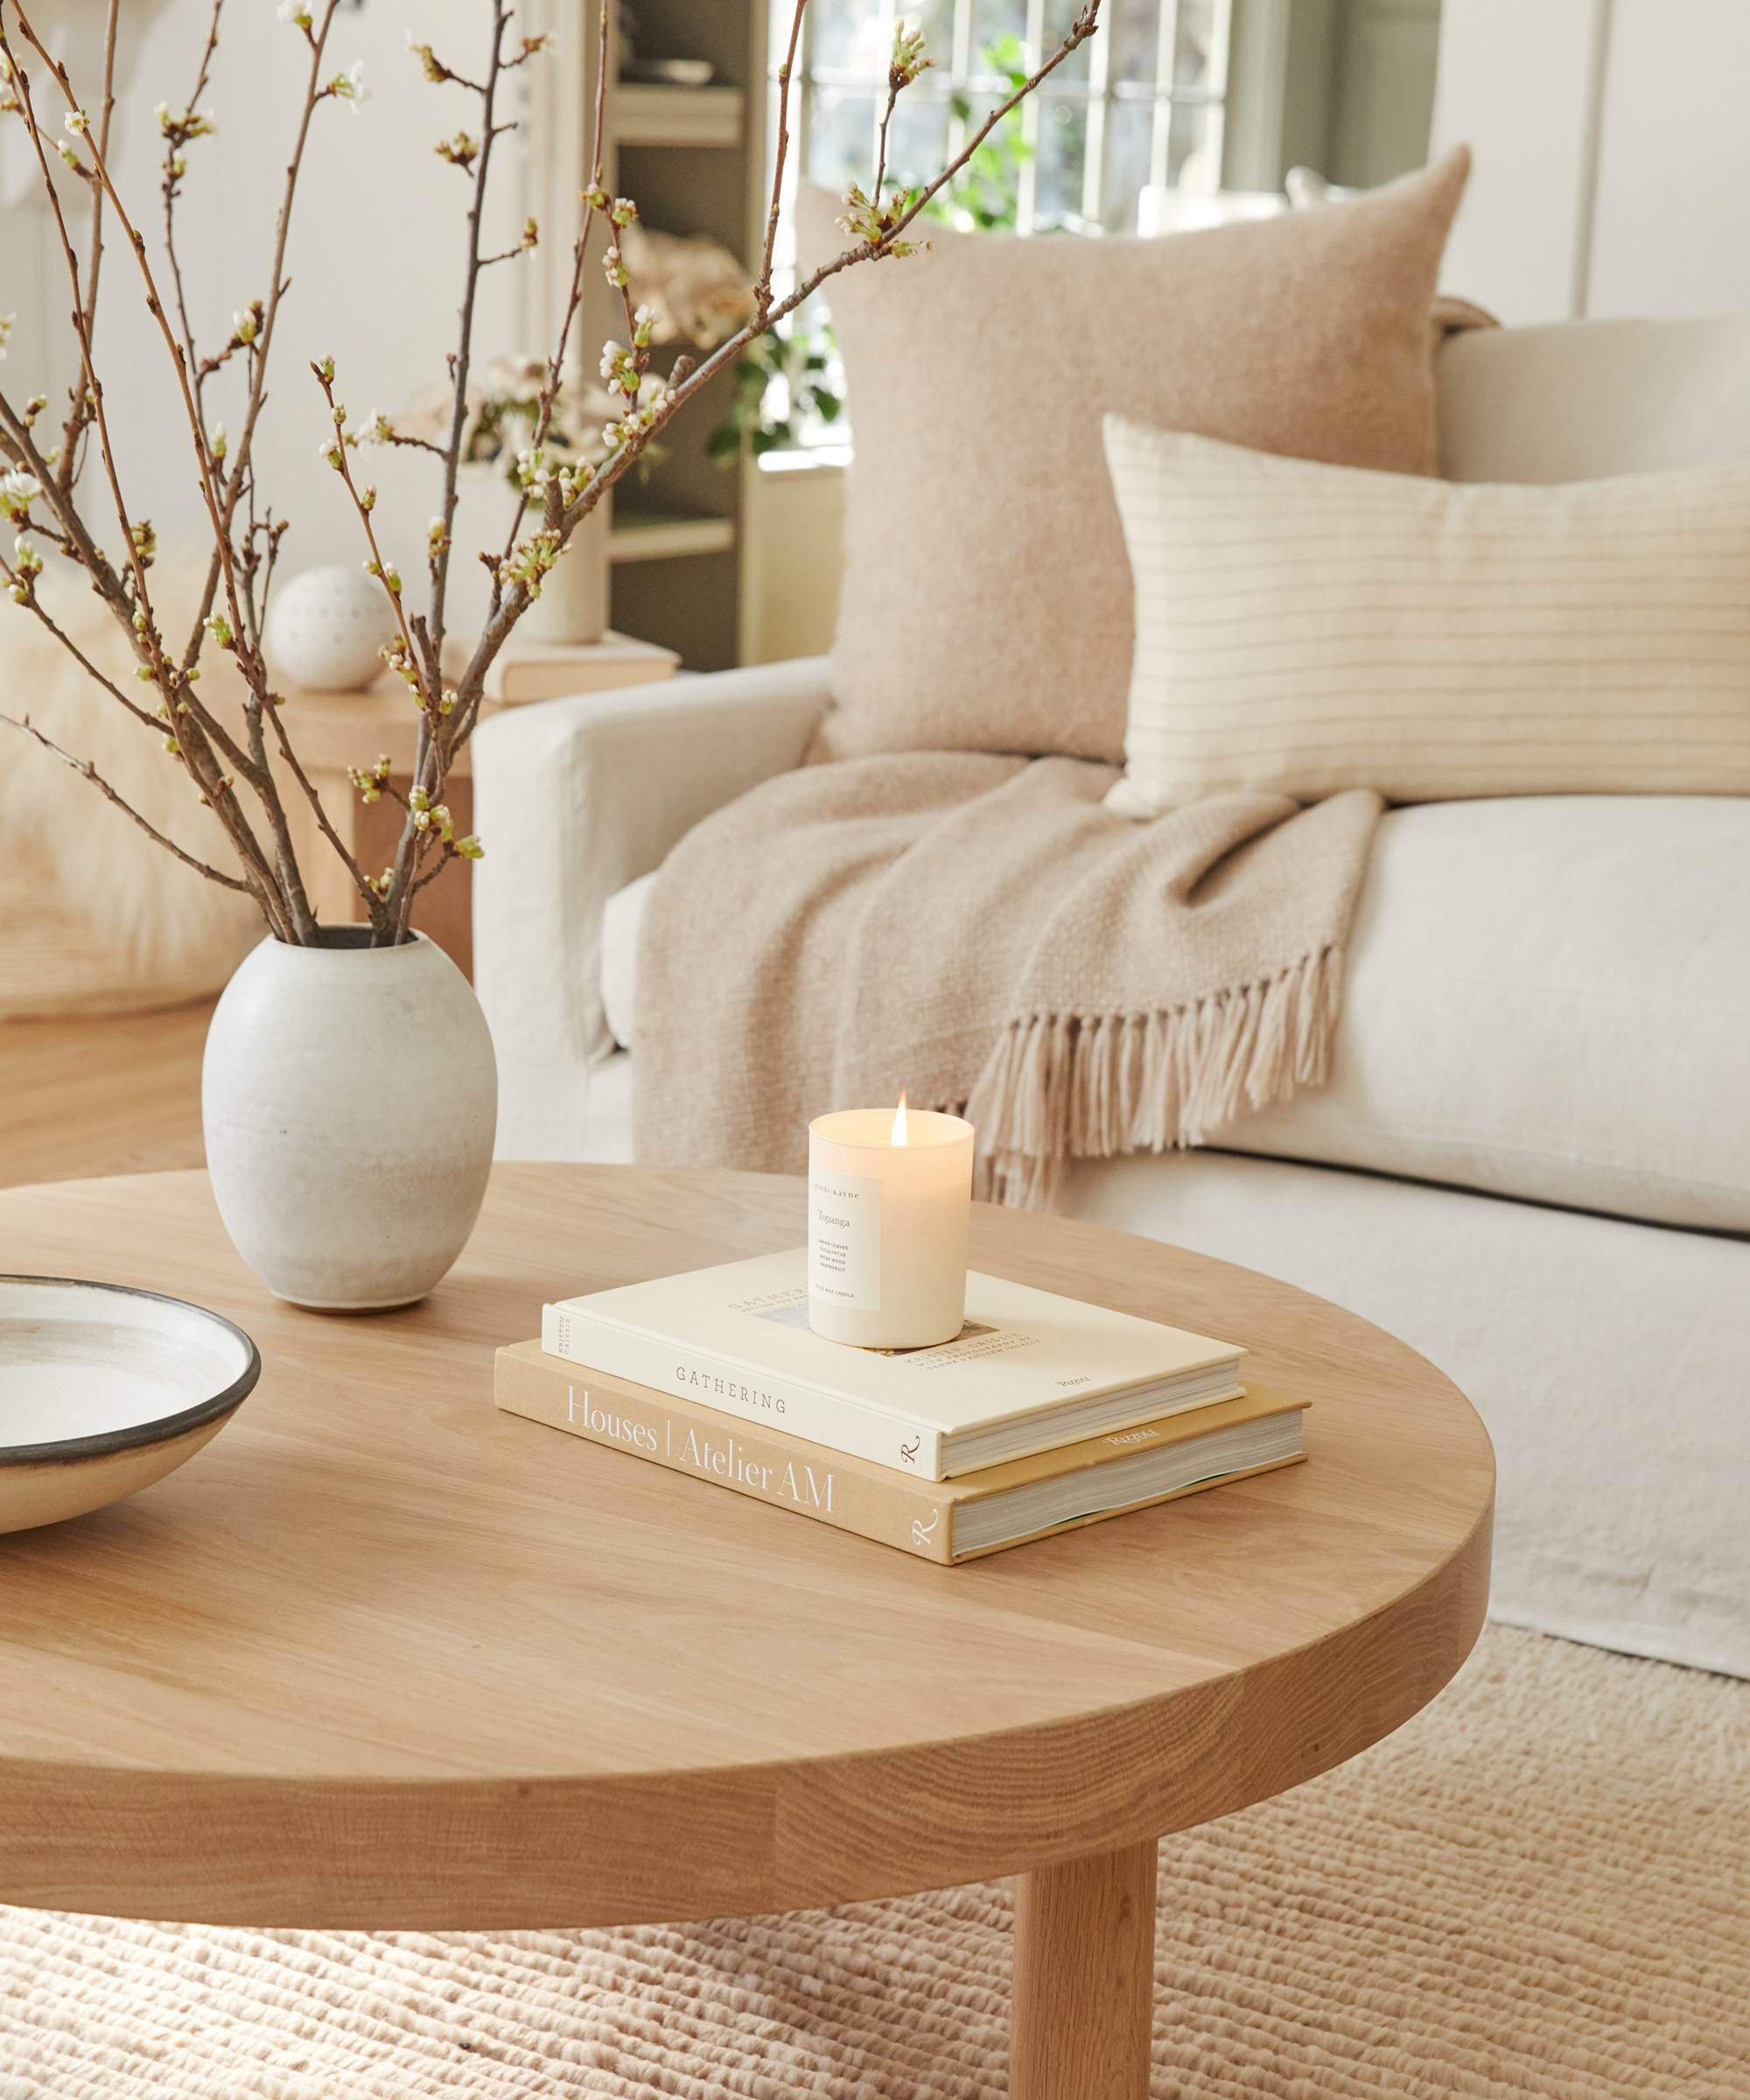 Coffee Table Styling: Ideas to Decorate a Coffee Table